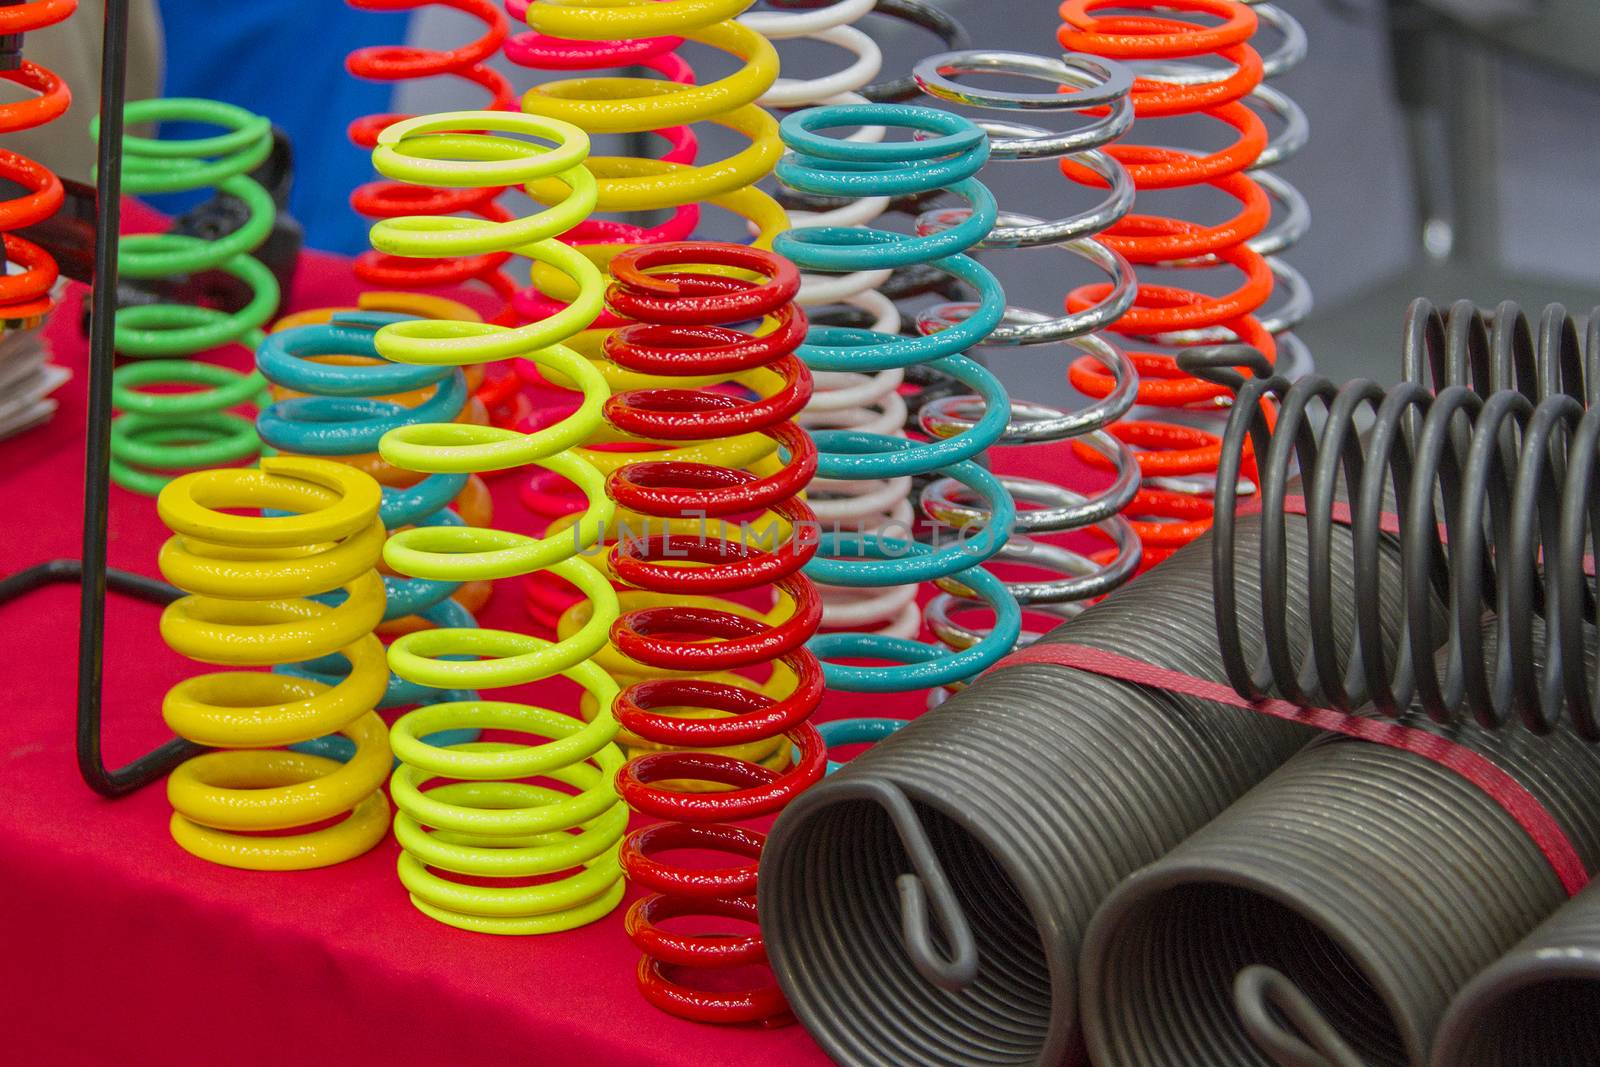 Coil springs are many colors on the red table.